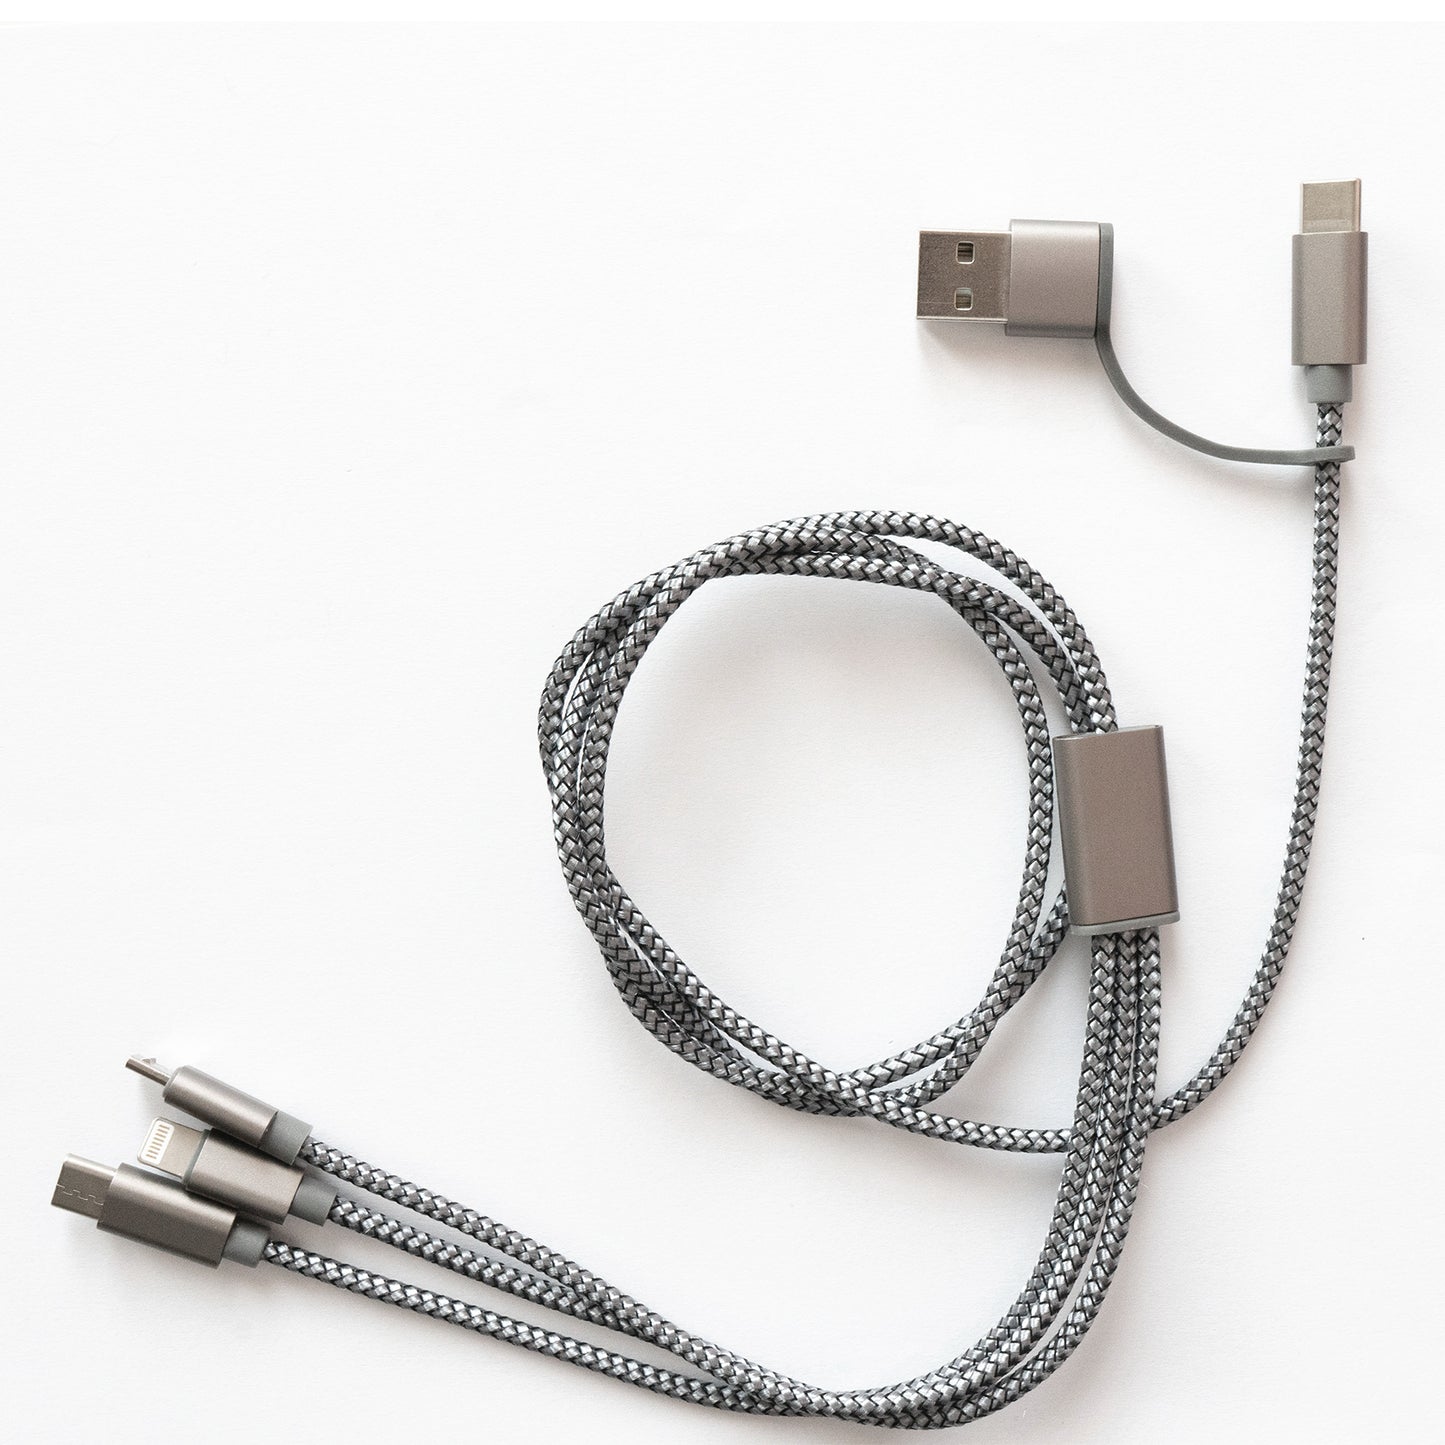 5 Way charging cable/ long - Ceres 4+